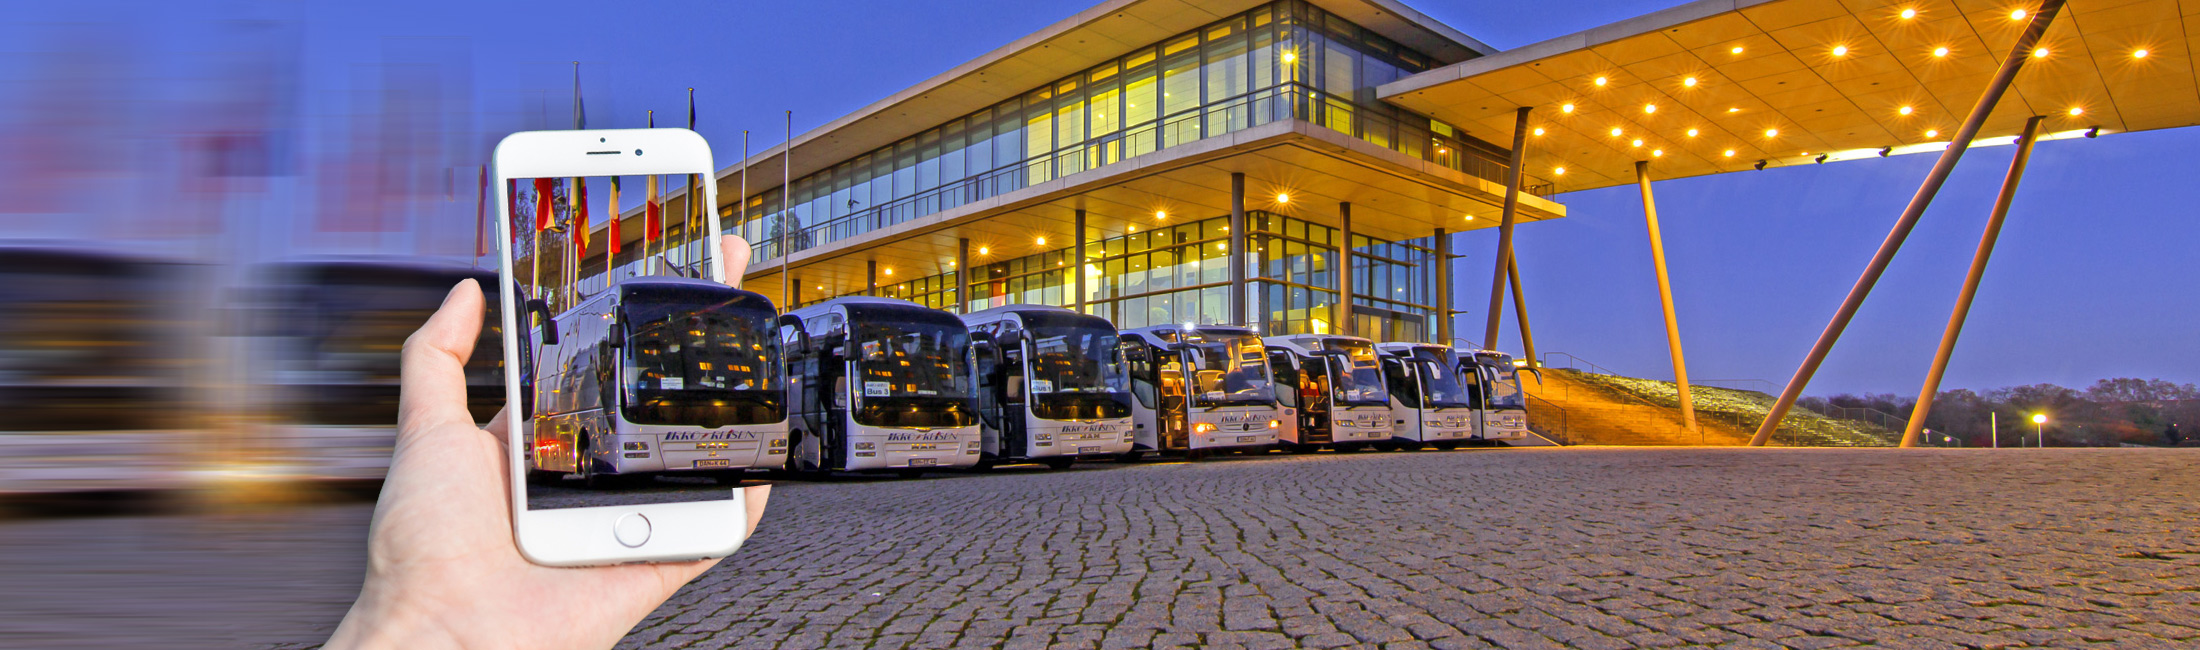 Coach Charter Germany and Europe - Get inspired!